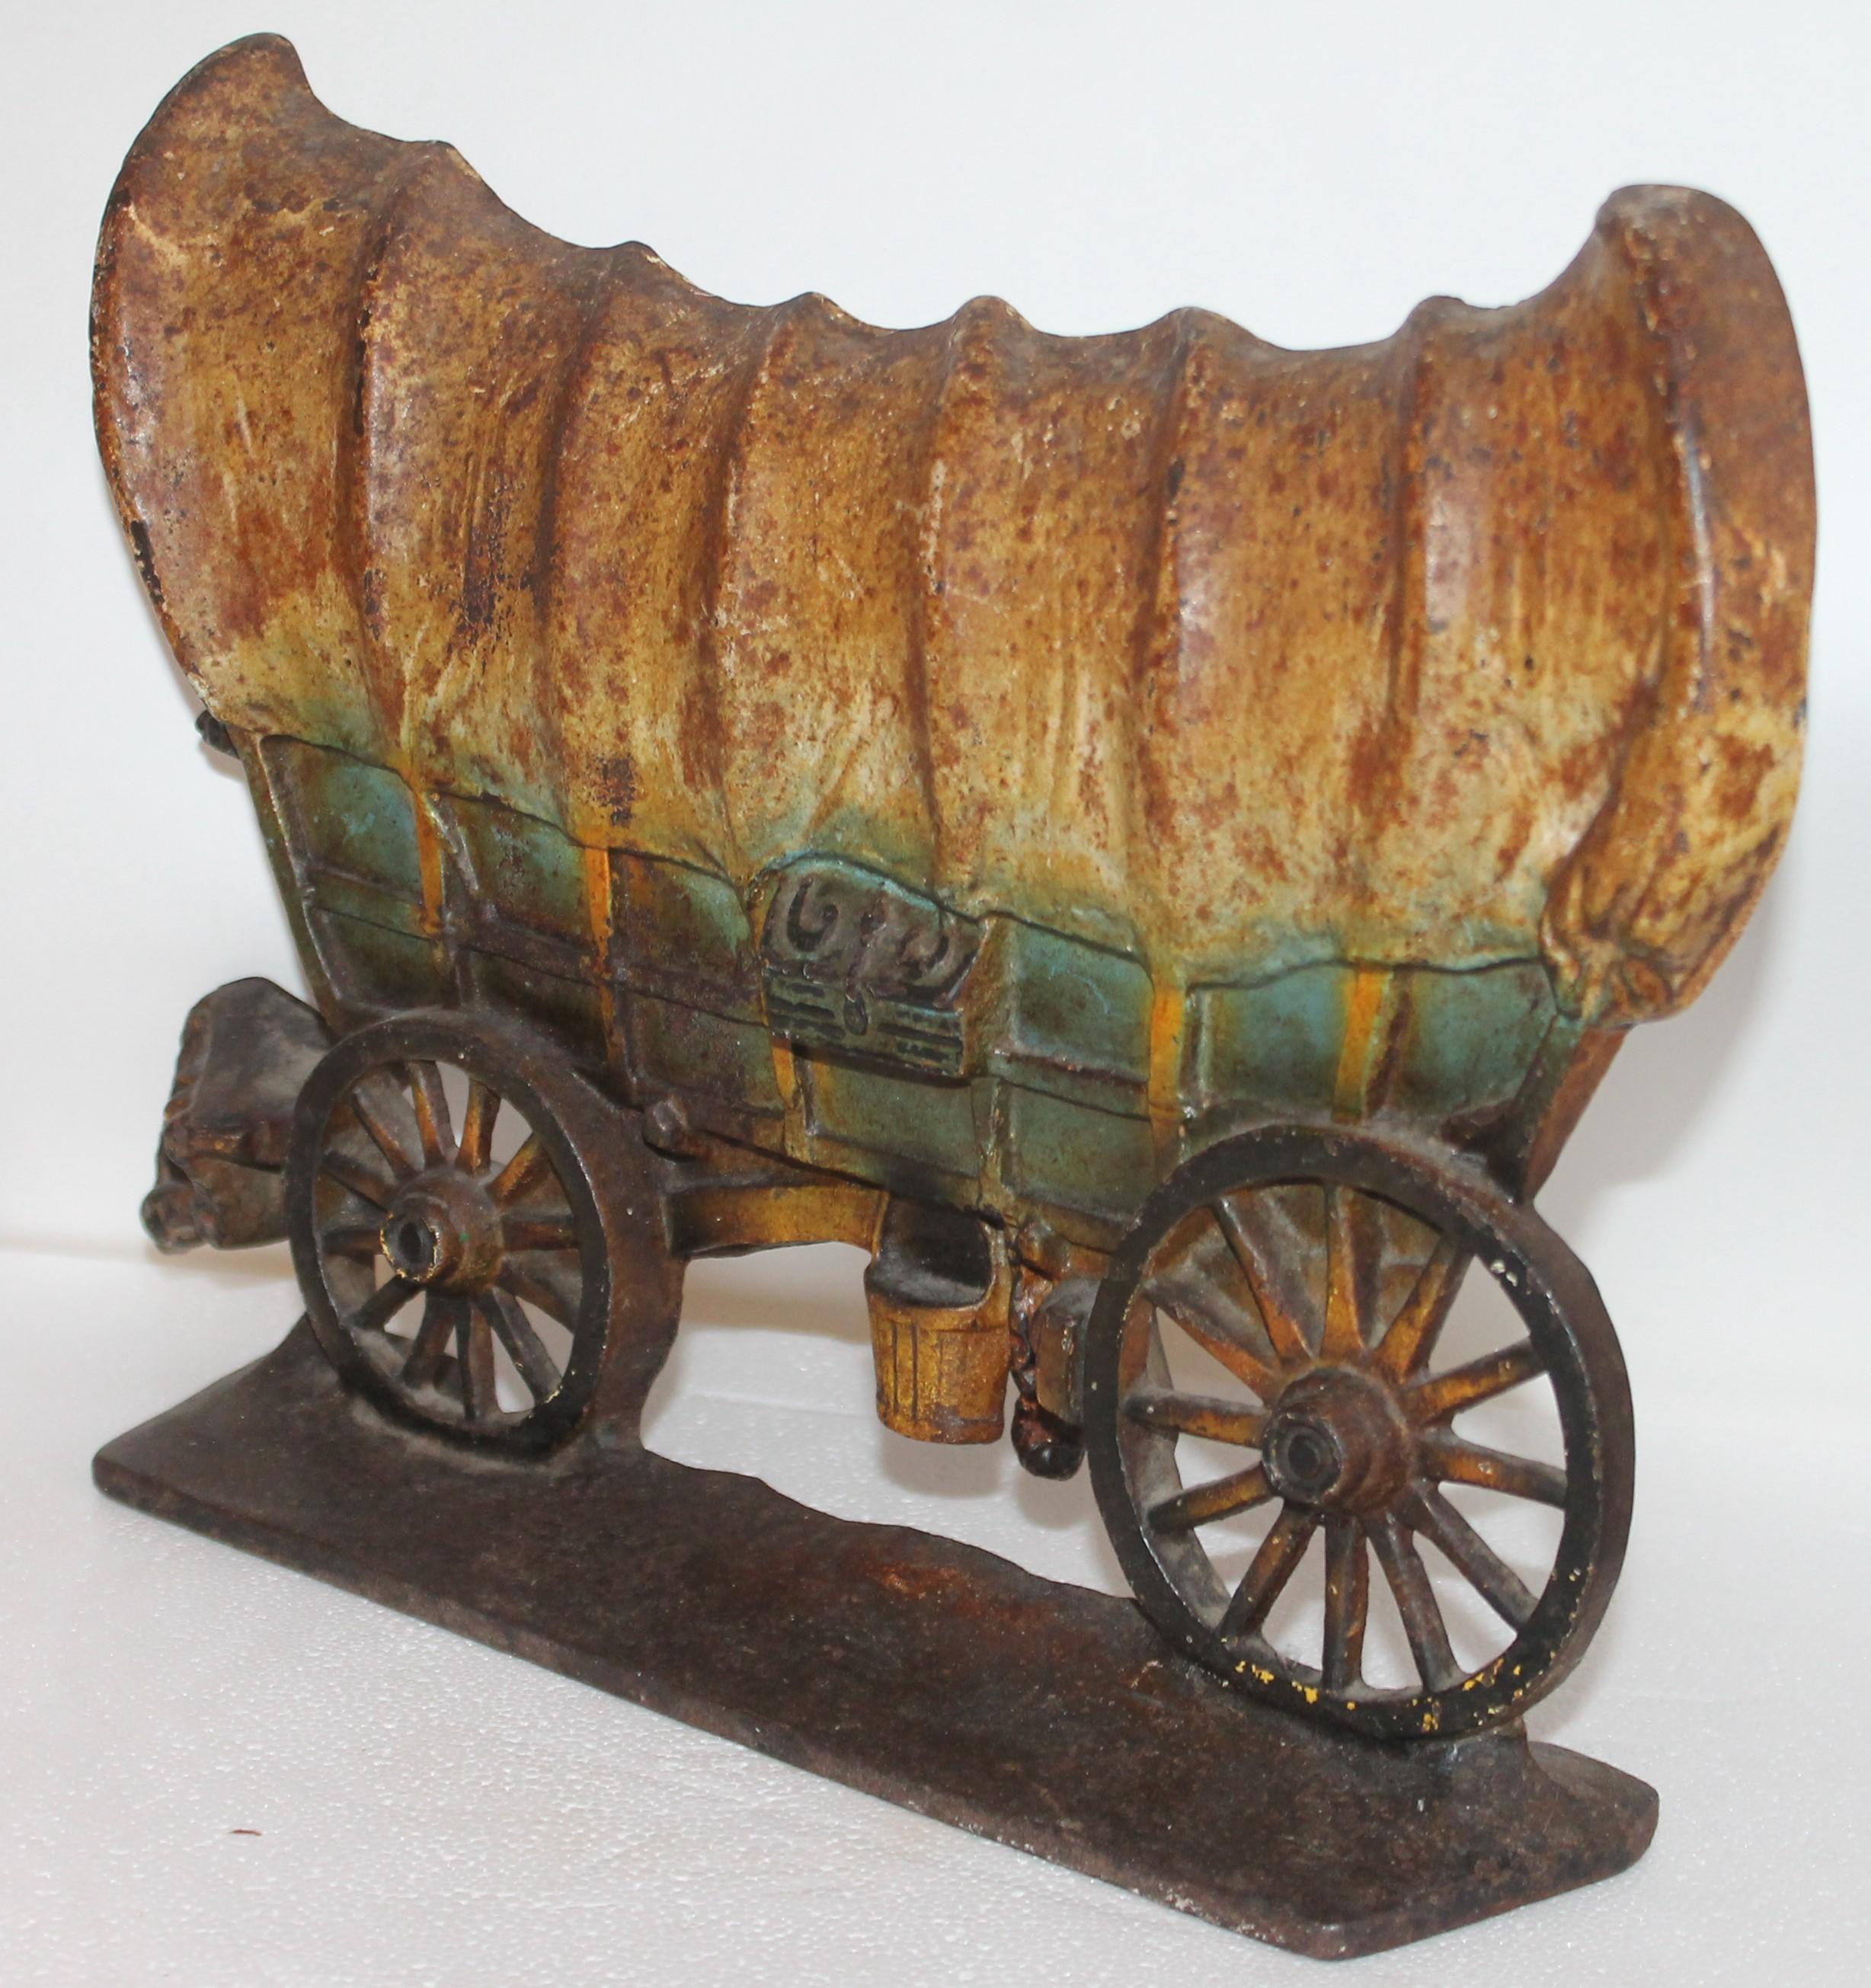 This amazing original aged stage coach door stop has amazing untouched patina. It is in fine condition.